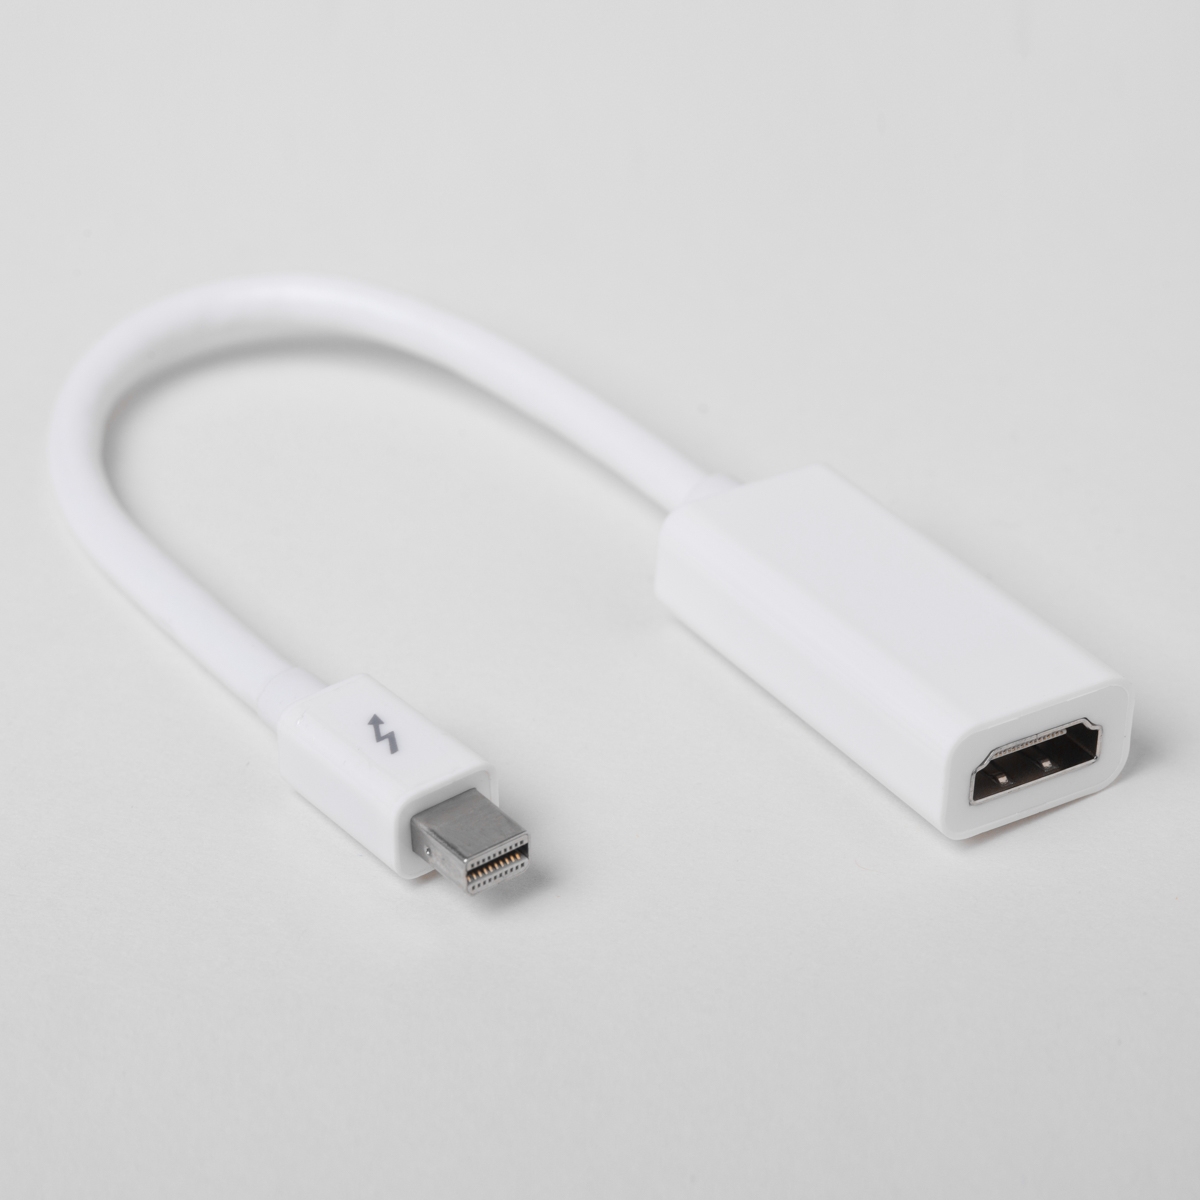 thunderbolt 2 female to hdmi male adapter